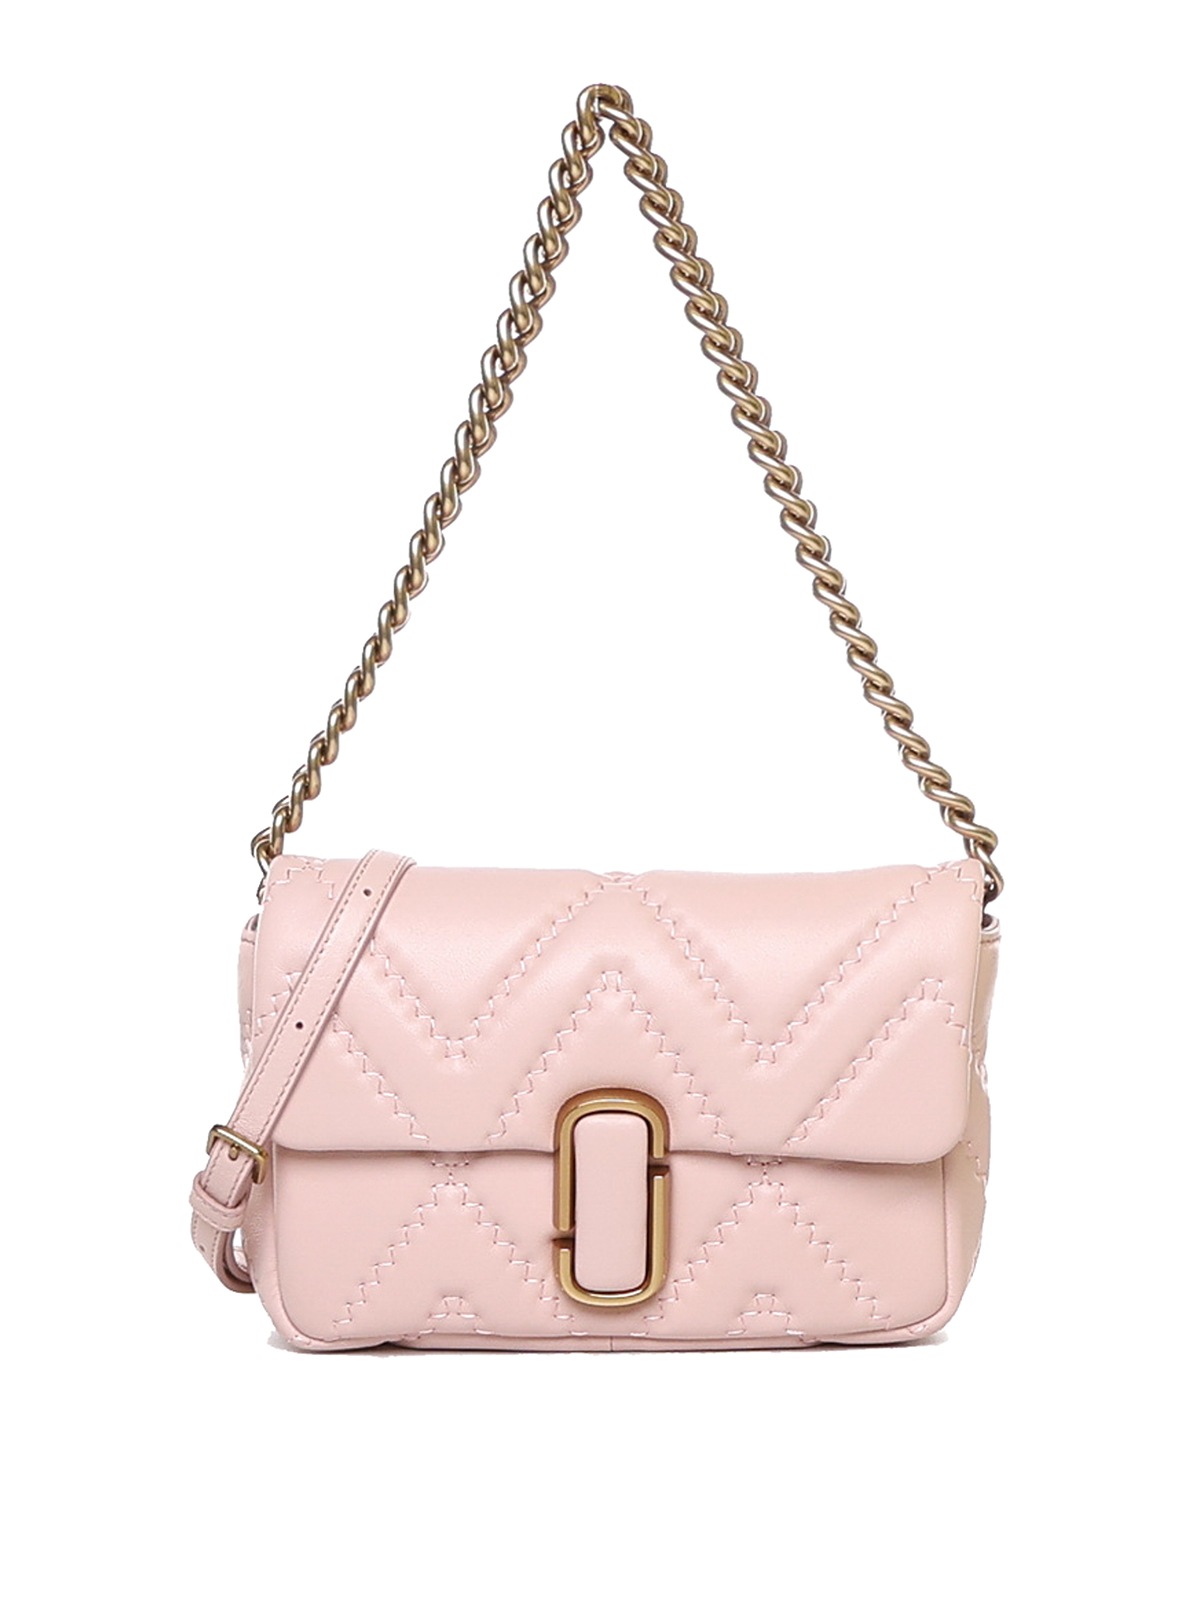 Marc Jacobs The Shoulder Bag In Nude & Neutrals